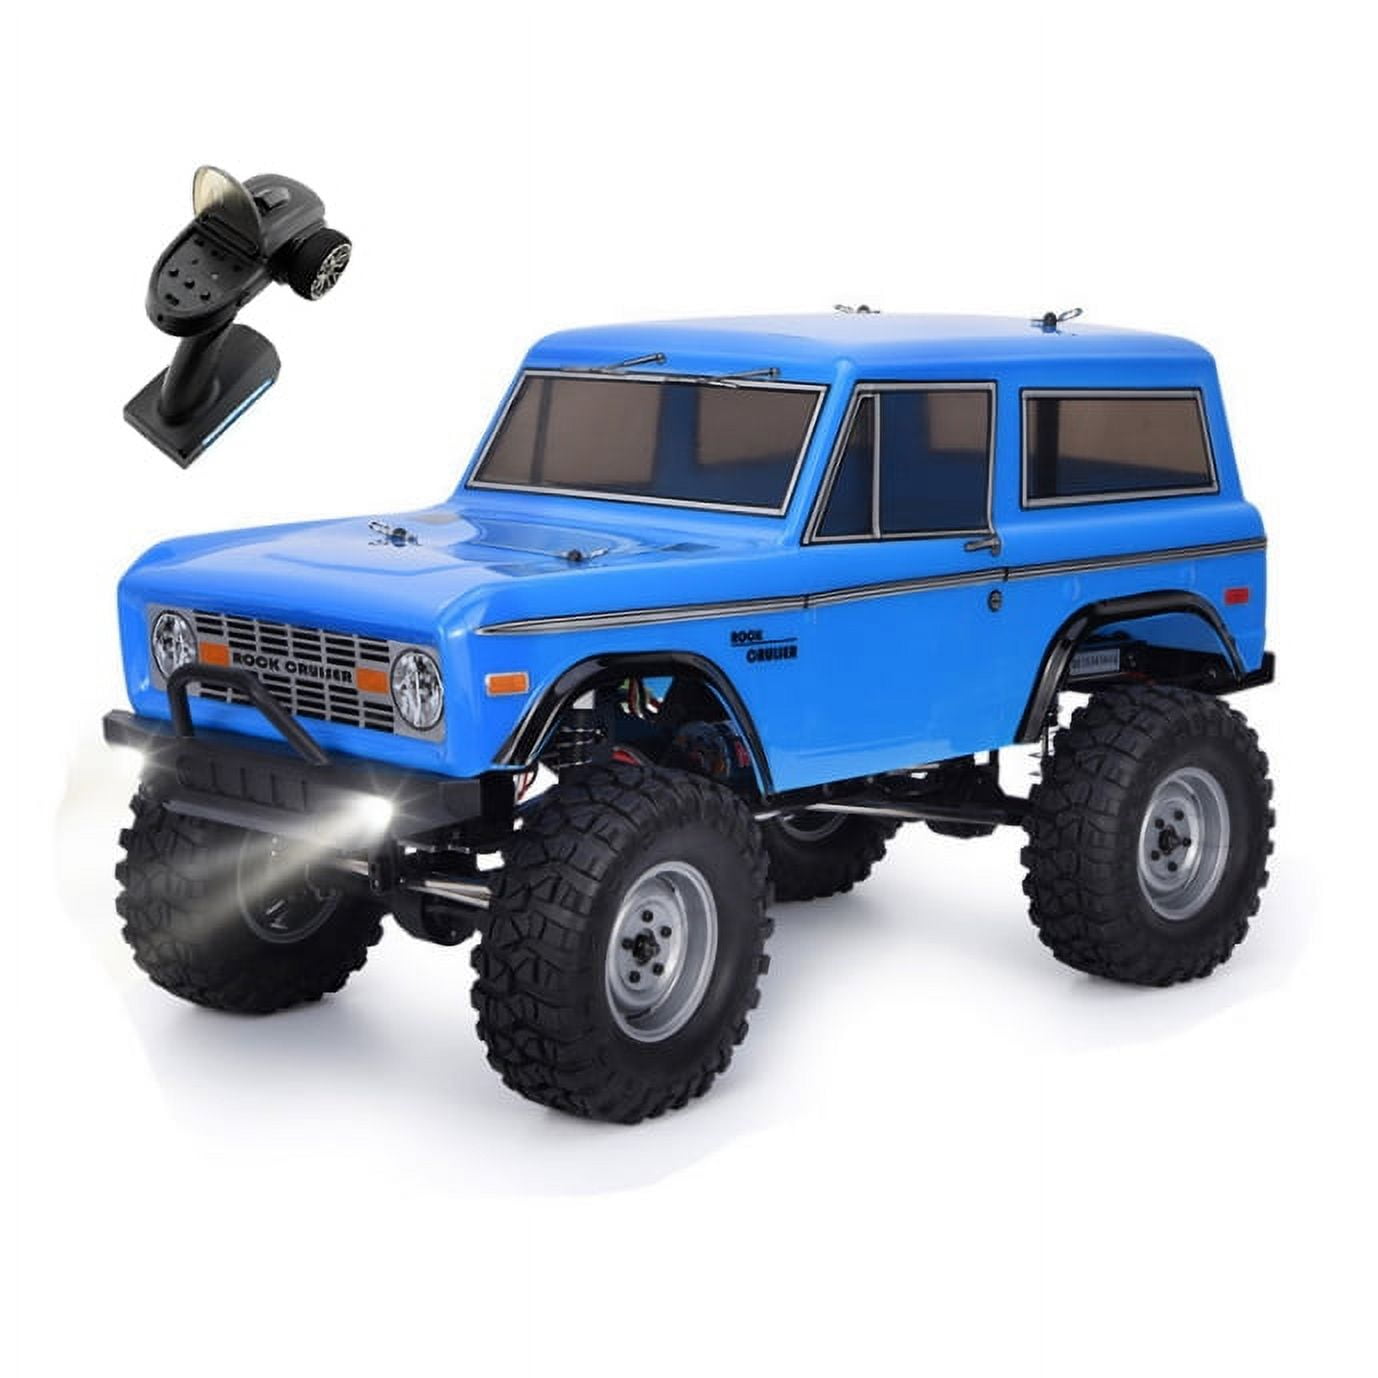 RGT Racing RC Car 1/10 Scale Electric RTR 4wd Off Road Rock Crawler Cruiser  RC Car with Lights | Electric Waterproof Rock Cruiser Hobby Toy for Kids 